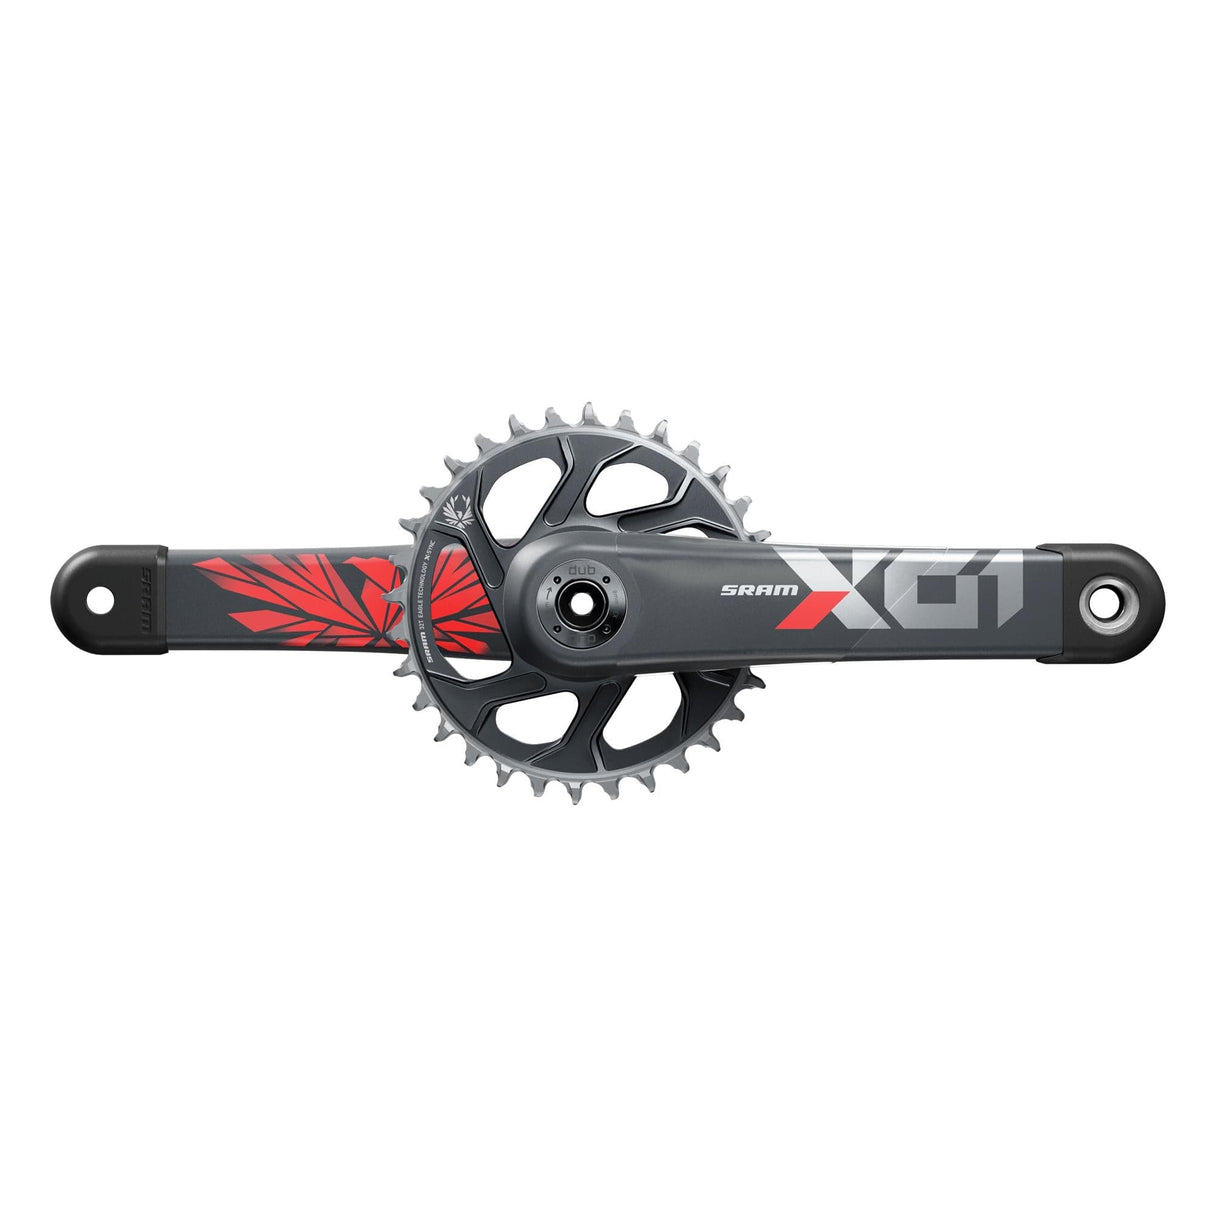 Sram Crankset X01 Eagle Boost 148 Dub 12S W Direct Mount 32T X-Sync 2 Chainring (Dub Cups/Bearings Not Included) C3: Lunar Oxy 170Mm